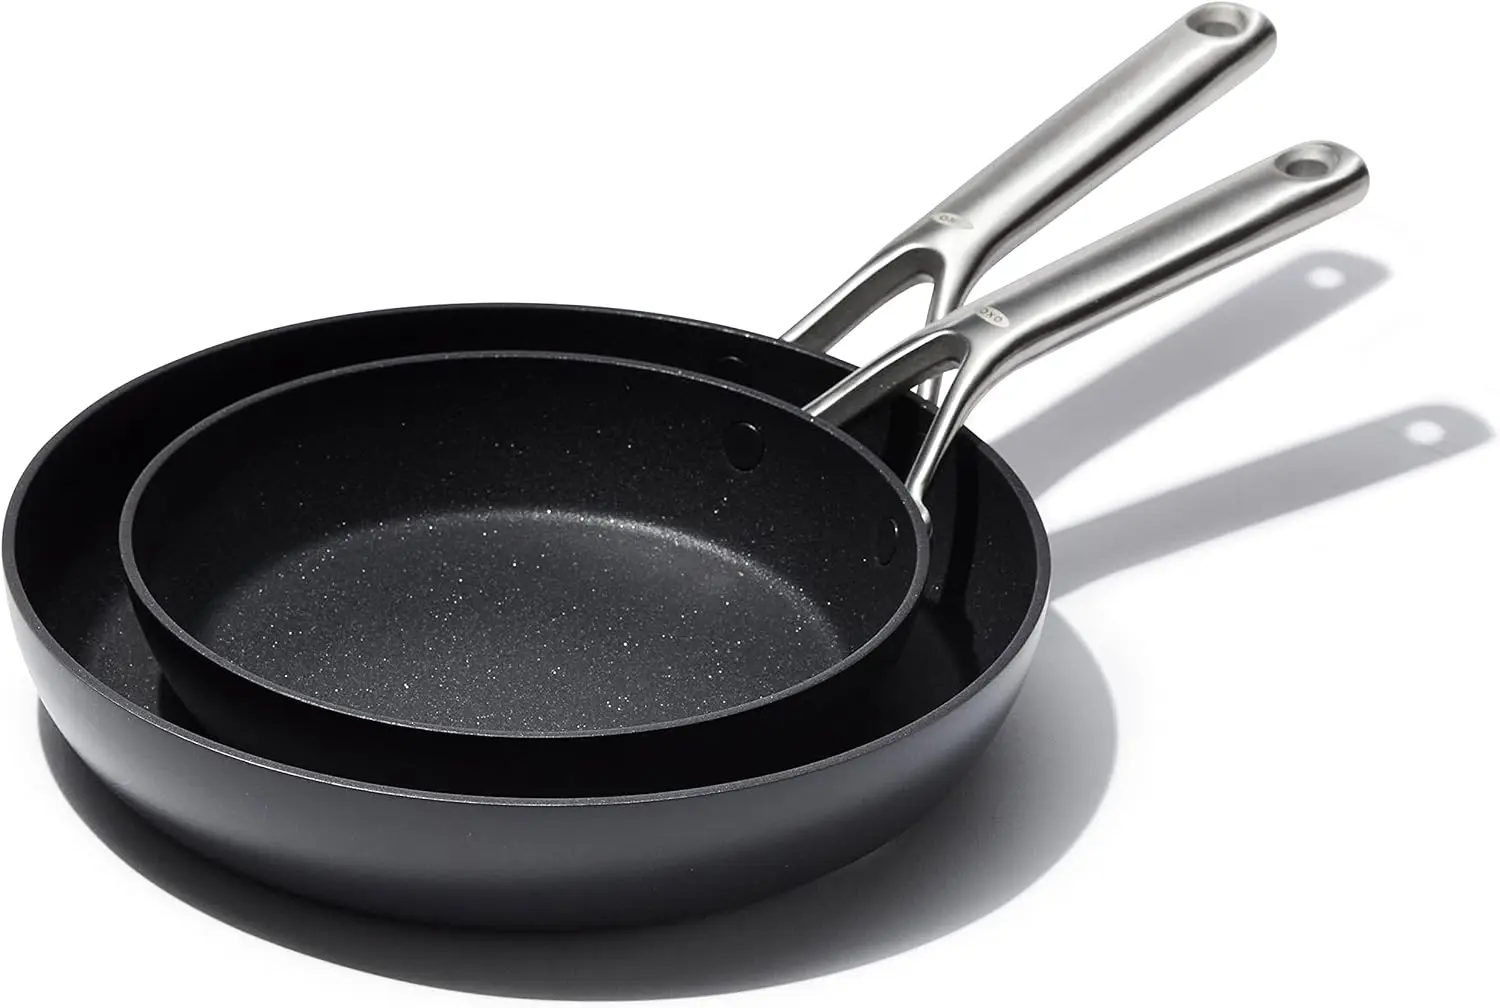 

Hard Anodized PFAS-Free Nonstick, 8" and 10" Frying Pan Skillet Set, Induction, Diamond reinforced Coating, Dishwasher S Silicon